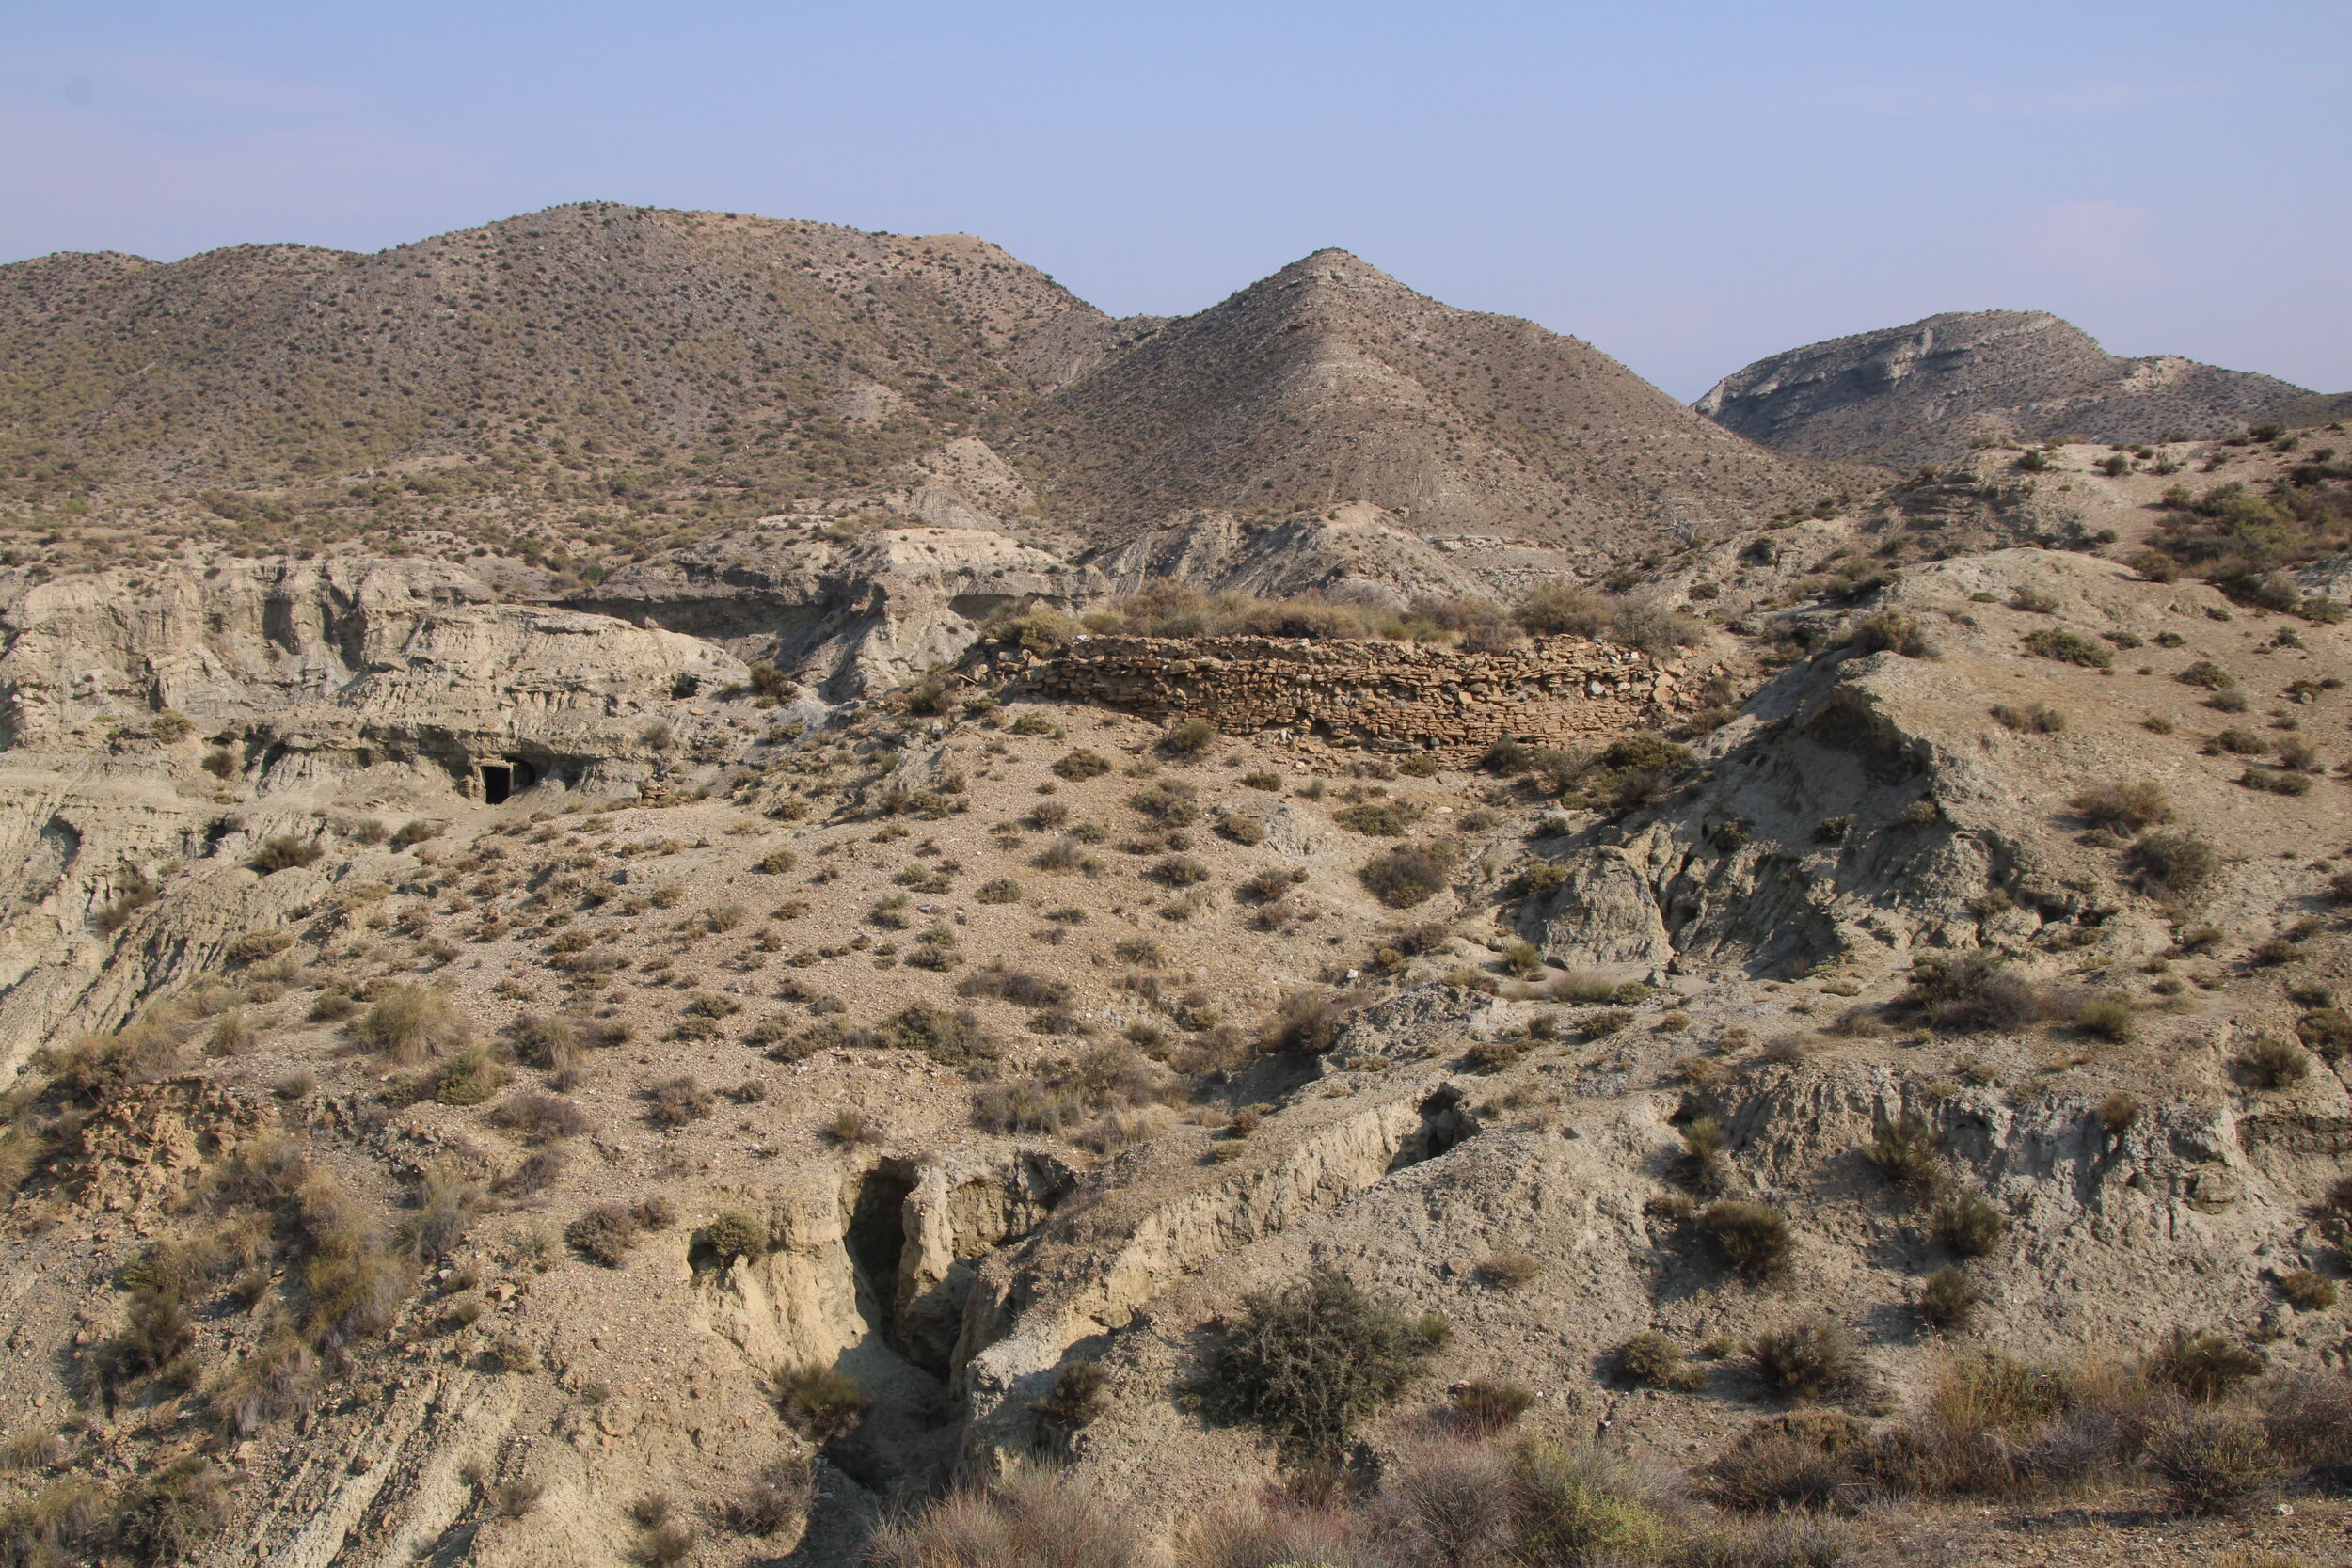   THE TABERNAS, Almeria, Spain. October 2nd, 2021. PICTURED:  Signs of antique habitation, or the remains of a location film set sit camouflaged in the desert landscape of Tabernas.  Photo credit:  Andy Corbley ©. 